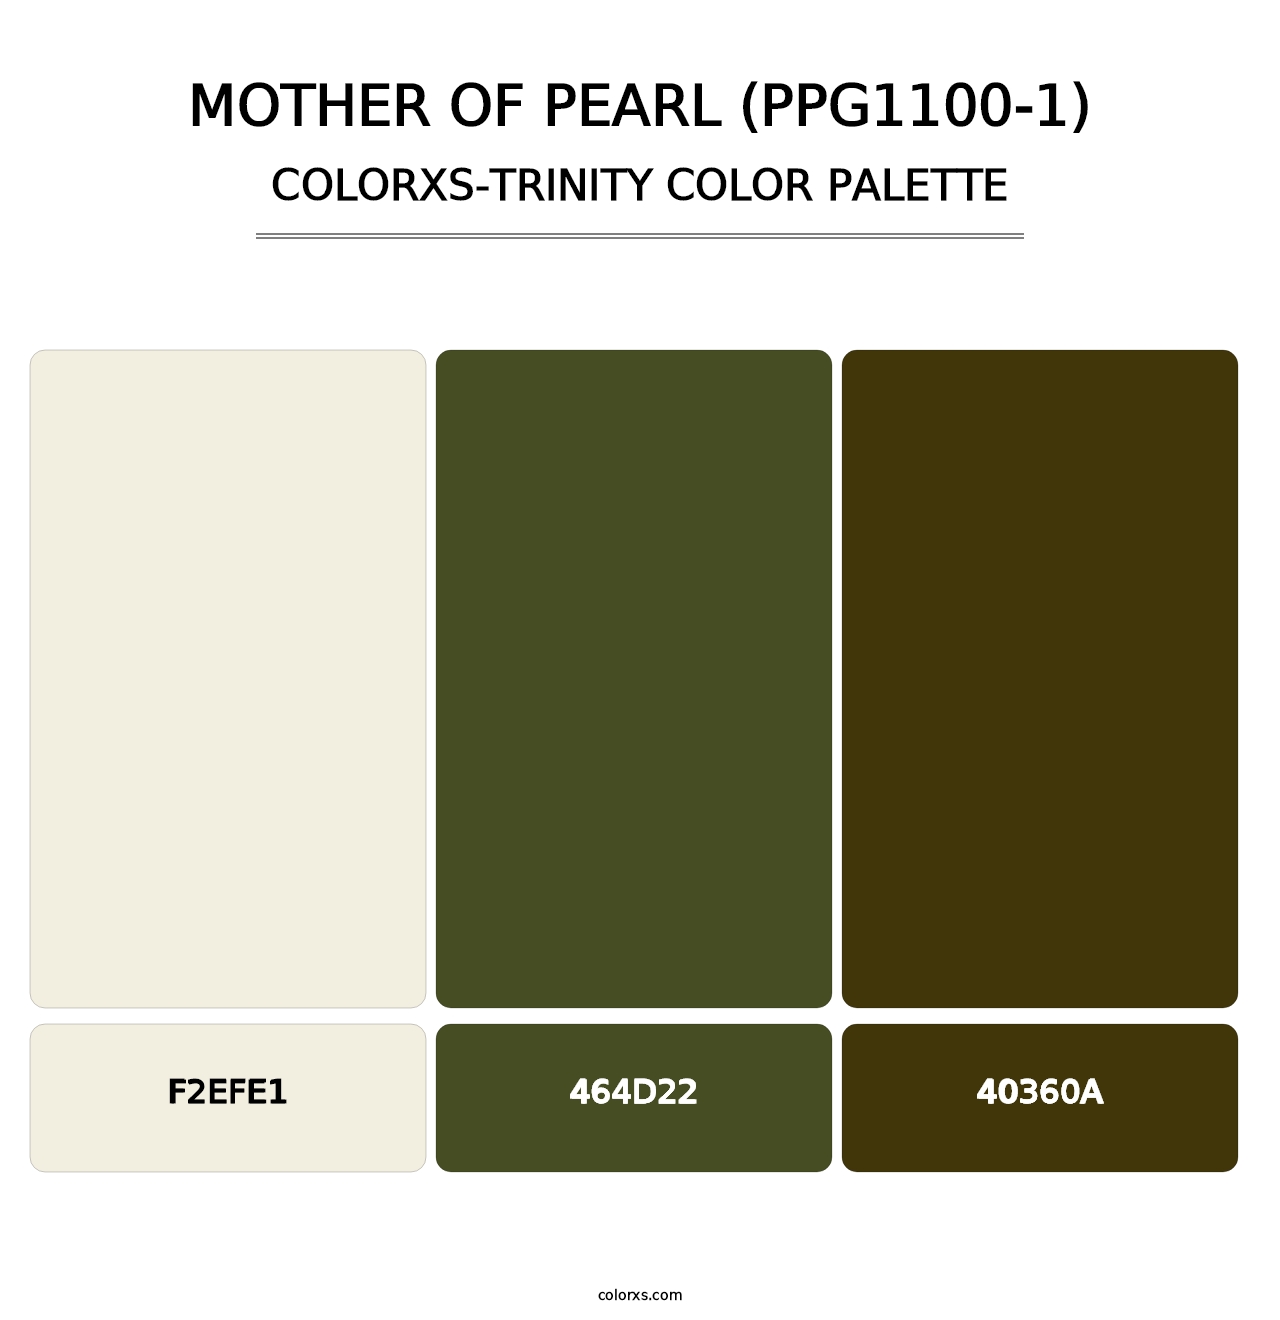 Mother Of Pearl (PPG1100-1) - Colorxs Trinity Palette